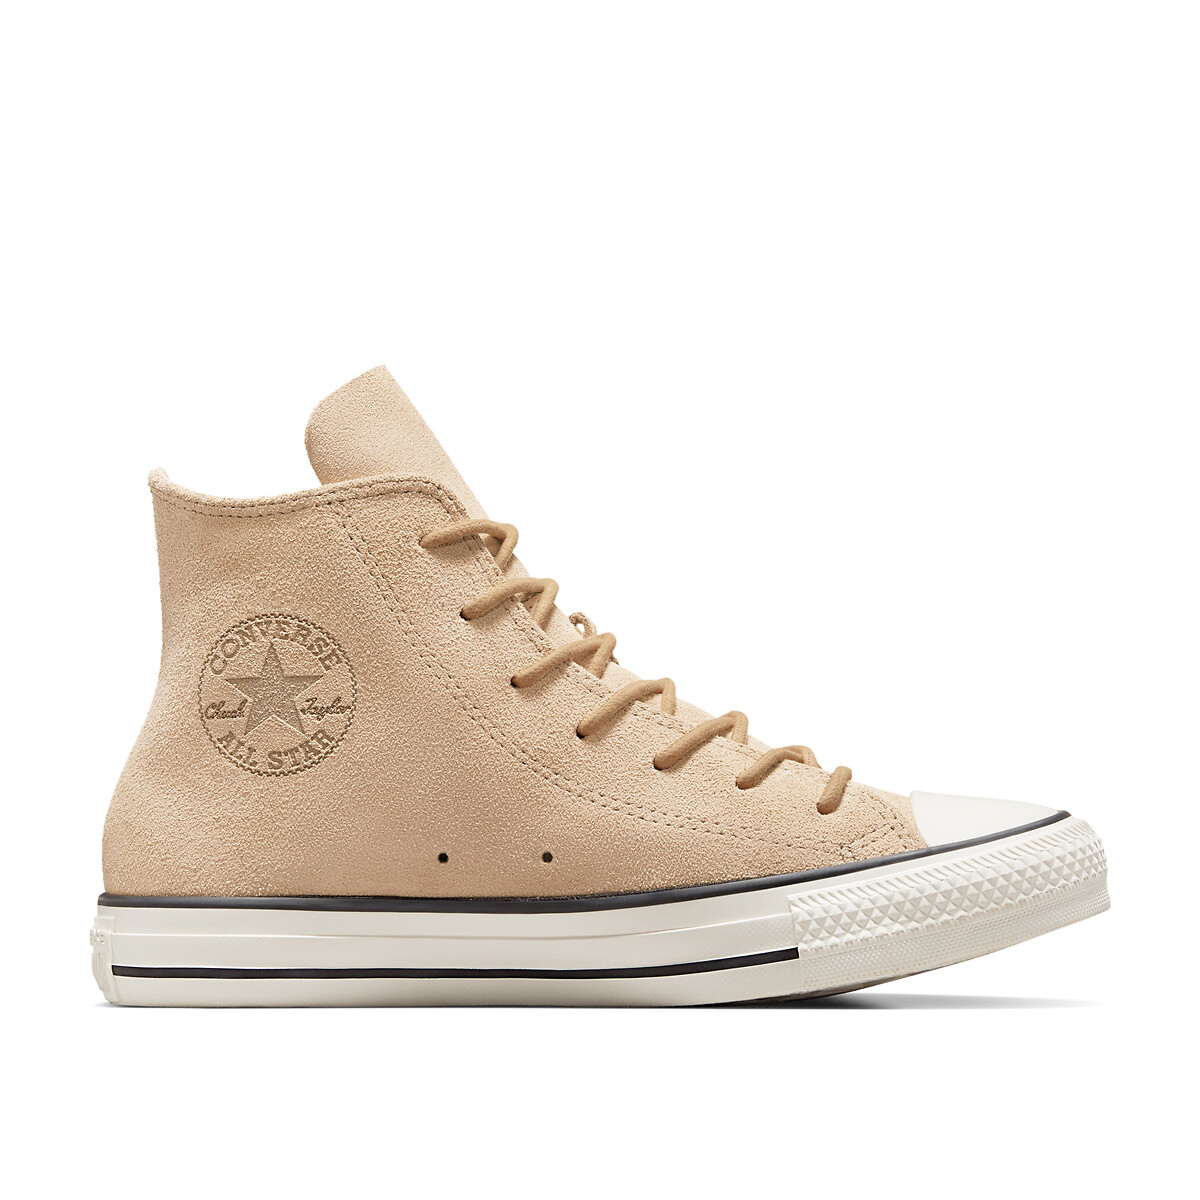 All Star Hi Fashion Suede & Leather High Top Trainers